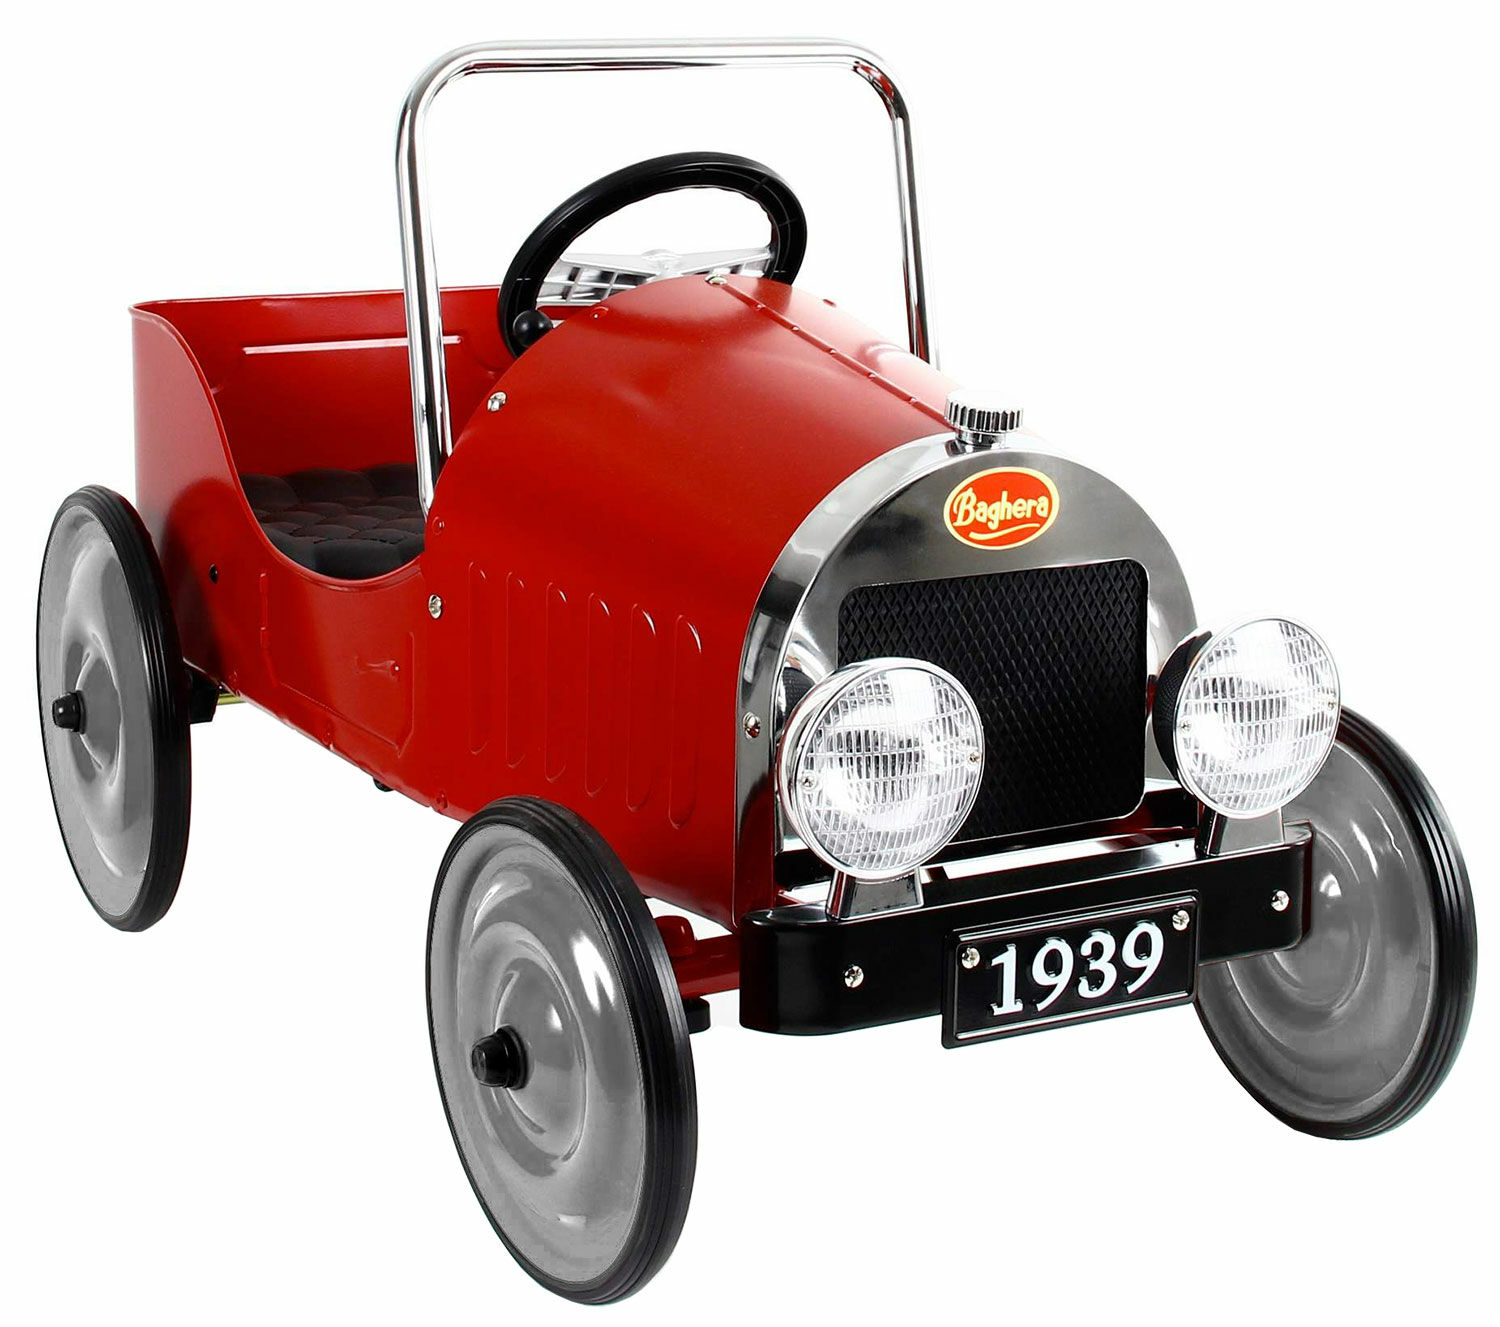 Pedal-car "Vintage Car Rouge" (for children from 3-6 years) by Baghera